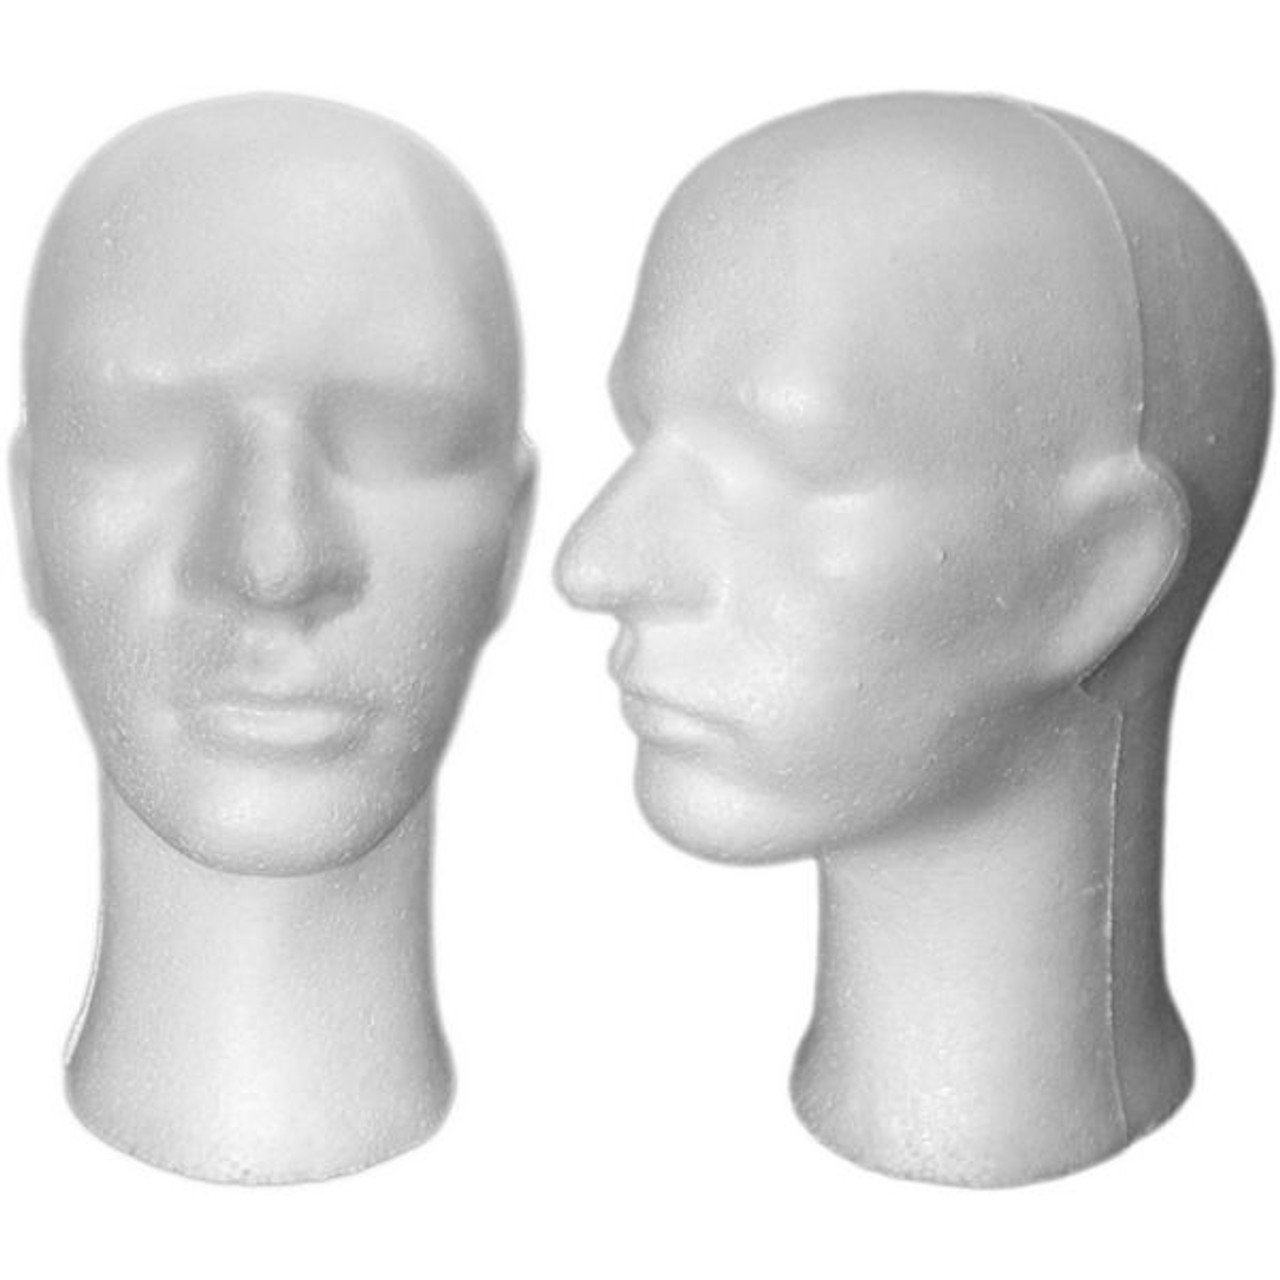 4 White Male Styrofoam Mannequin Head with Long Neck MM-256 - Mannequin Mode